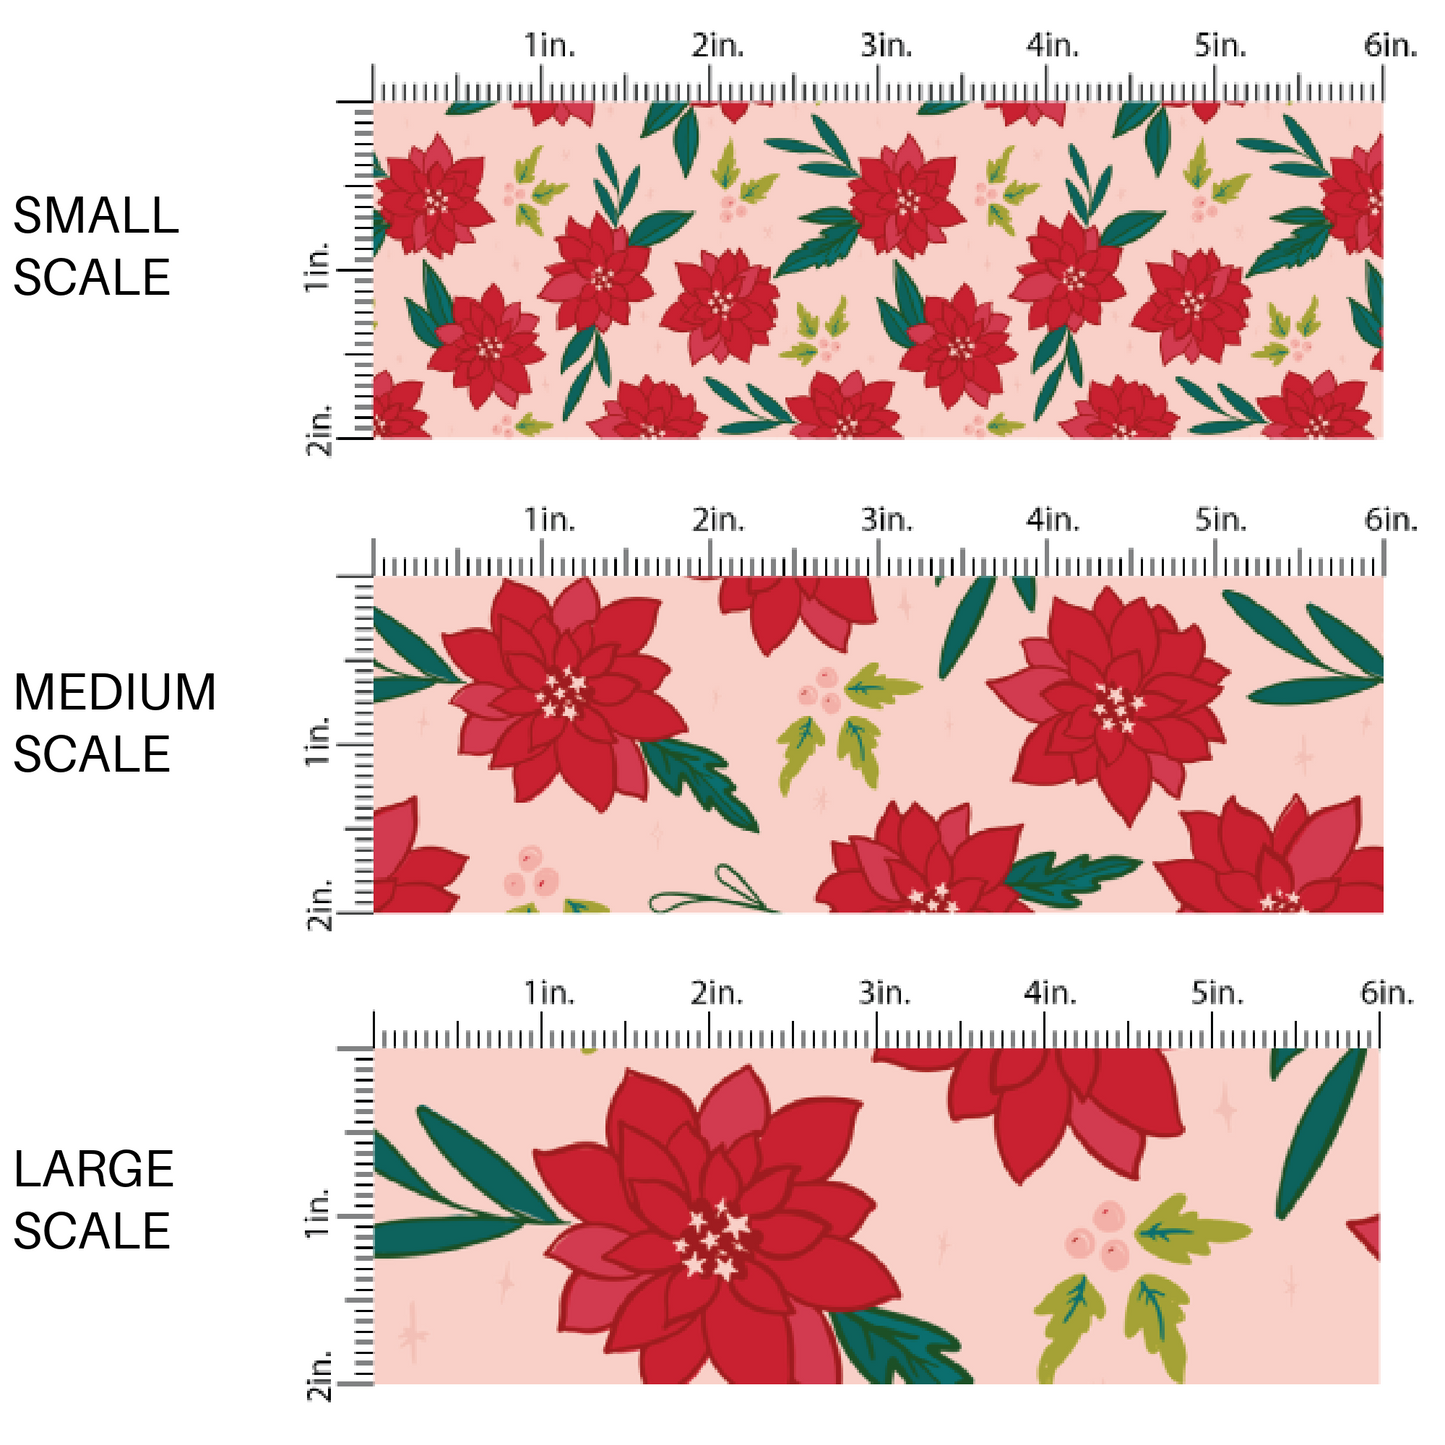 This scale chart of small scale, medium scale, and large scale of these holiday pattern themed fabric by the yard features large red poinsettias on pink. This fun Christmas fabric can be used for all your sewing and crafting needs!